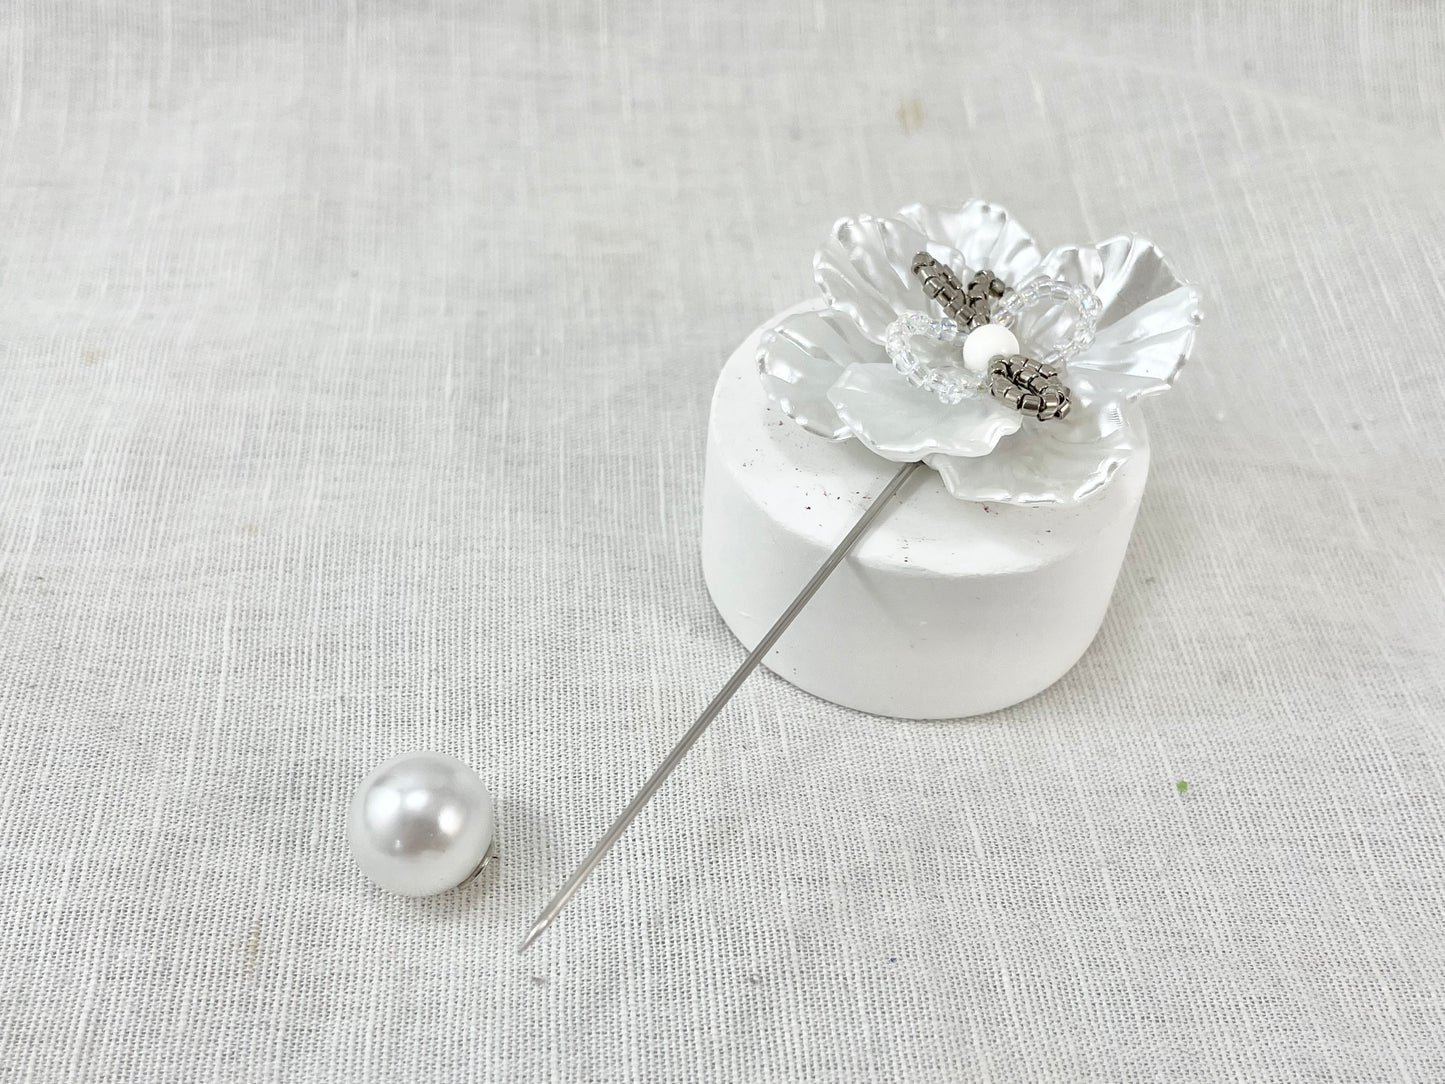 Pin brooch - flower - pure white